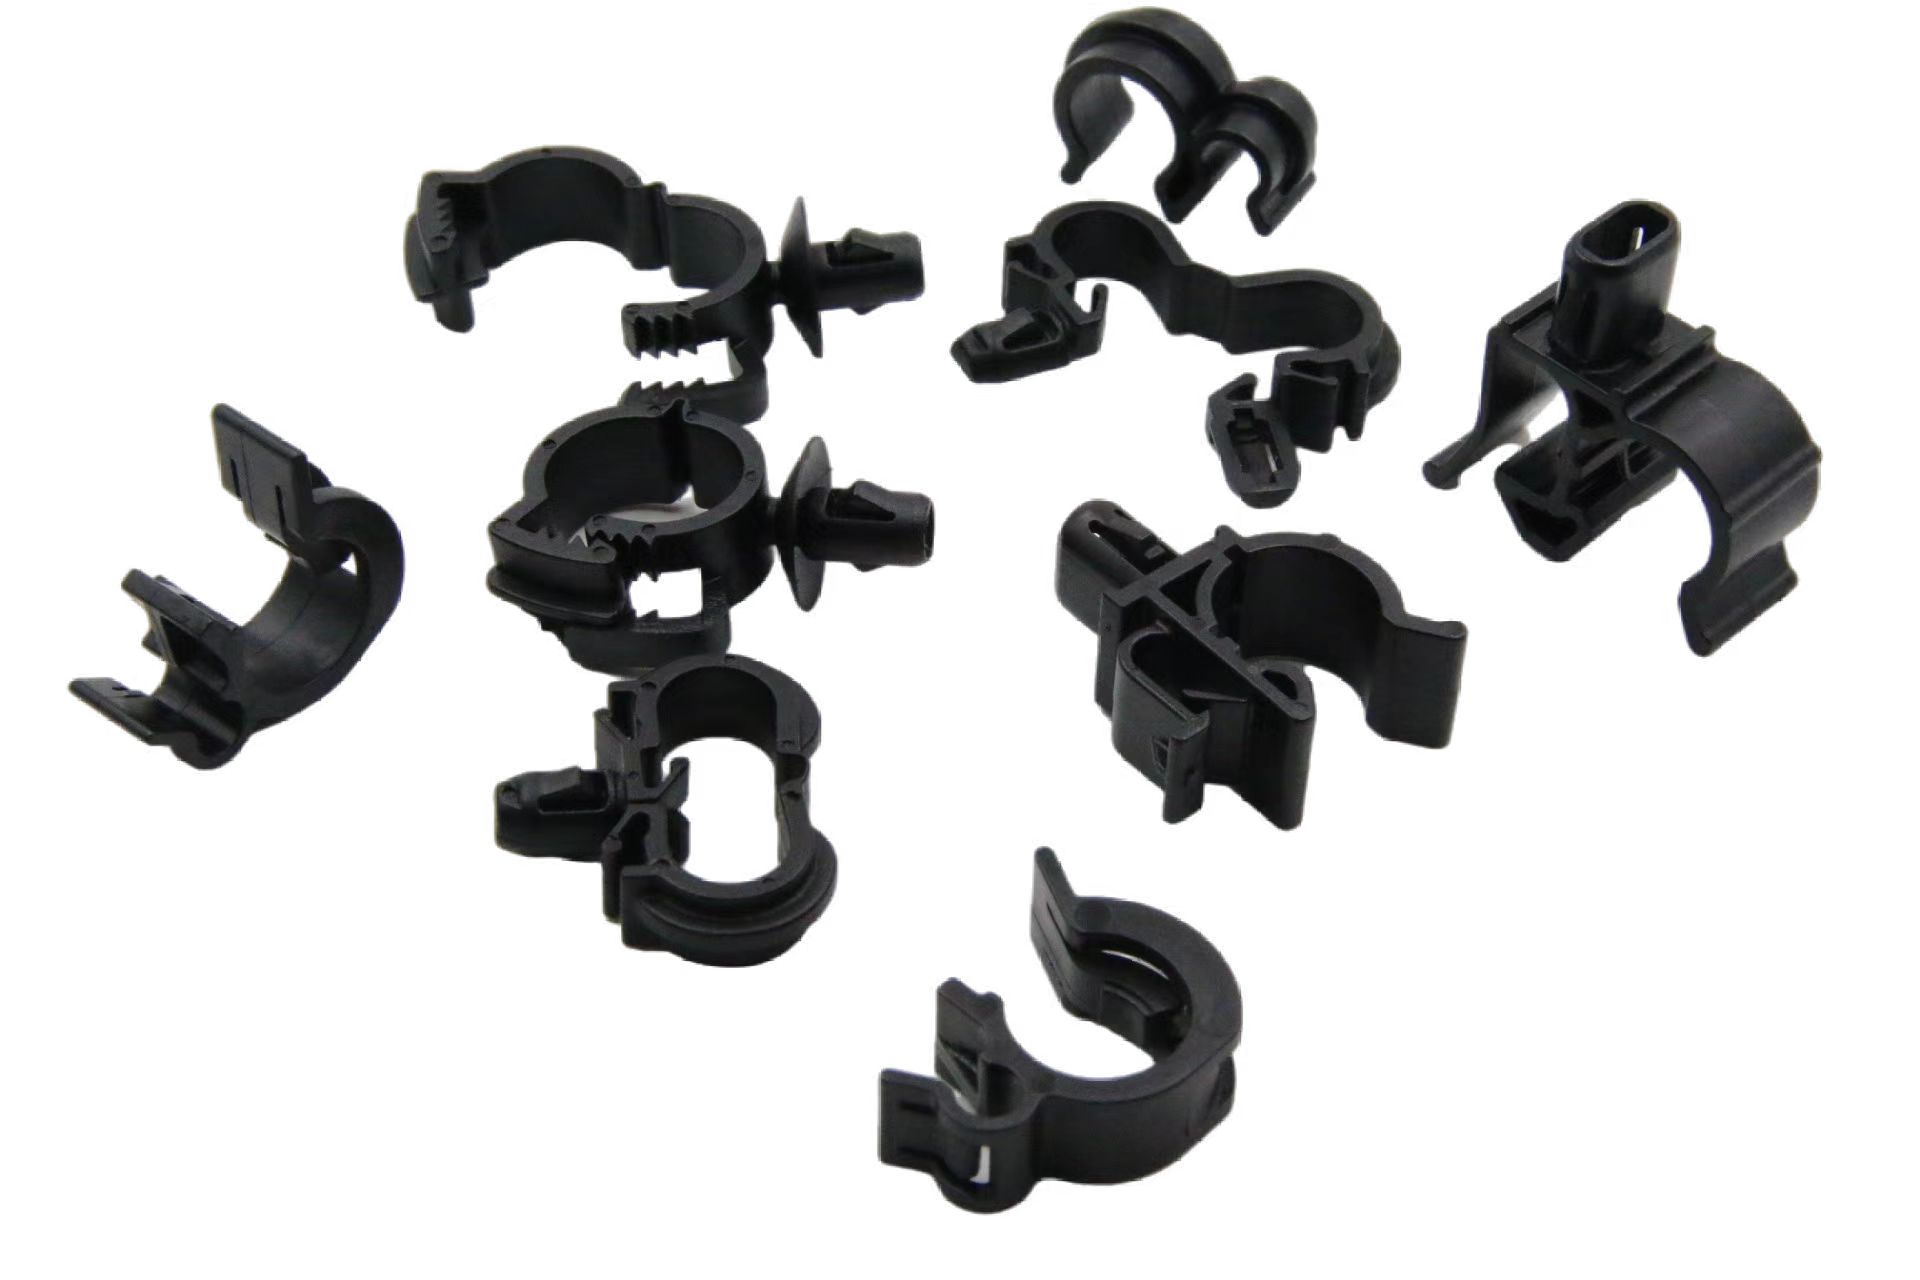 Prototypes of Clamp Parts